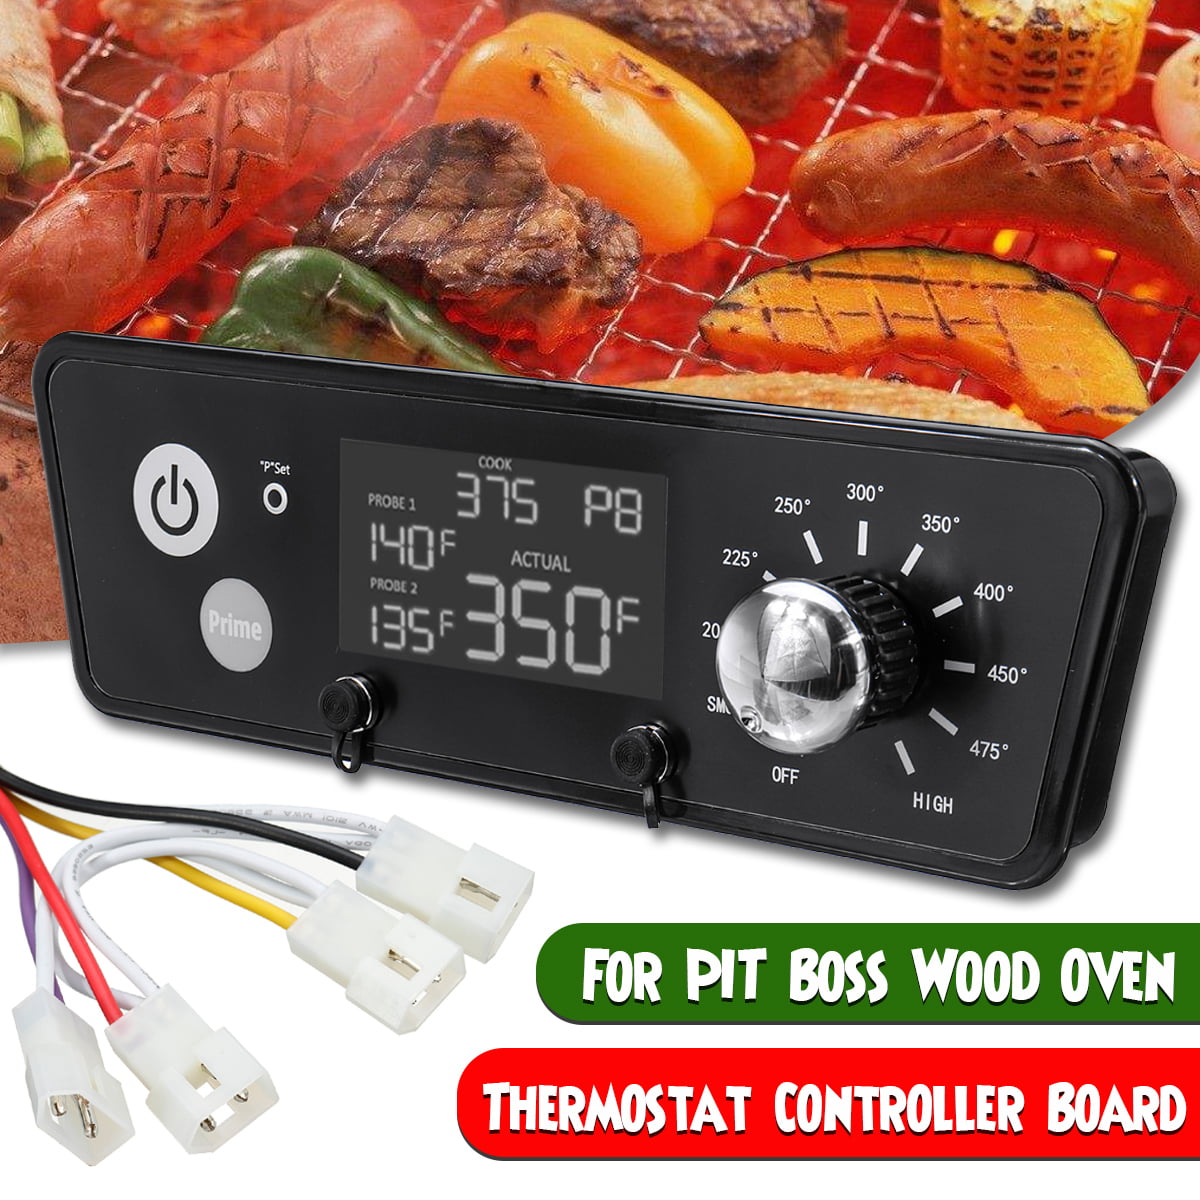 BBQ Digital Thermostat Control Board For Pit Boss Wood Oven Grills W/LCD Display 